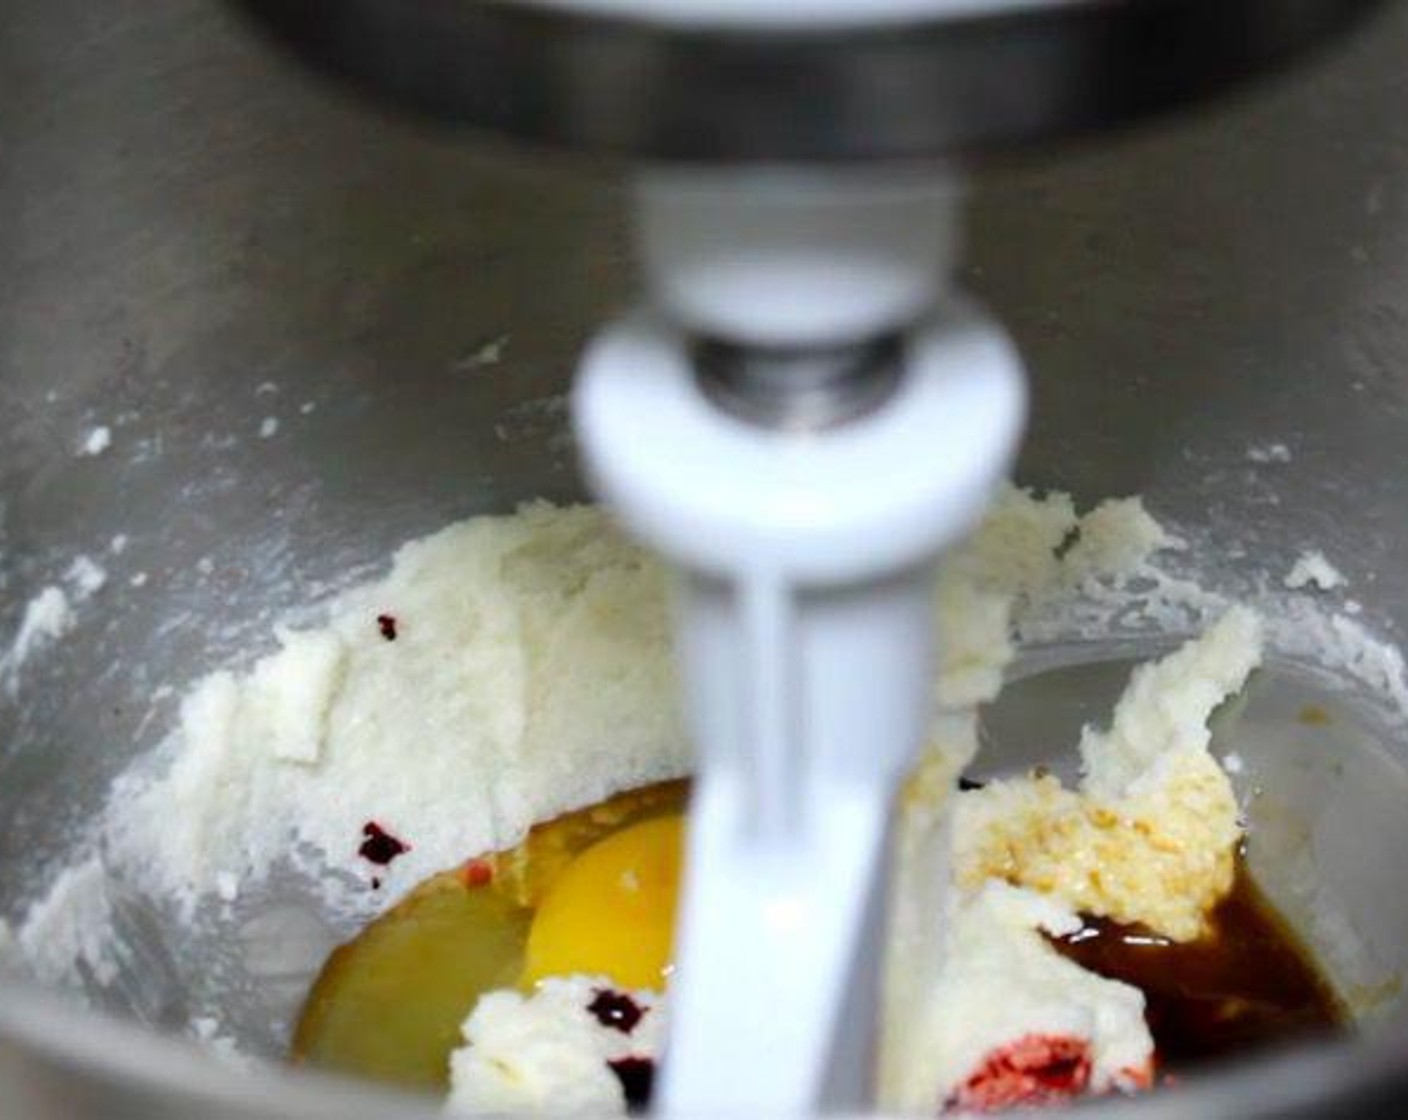 step 1 In the bowl of a stand mixer, add Granulated Sugar (1 cup) and Butter (2/3 cup) and mix until smooth. Add Farmhouse Eggs® Large Brown Egg (1), Vanilla Extract (1 tsp), and Red Food Coloring (1 Tbsp). Mix again until combined.